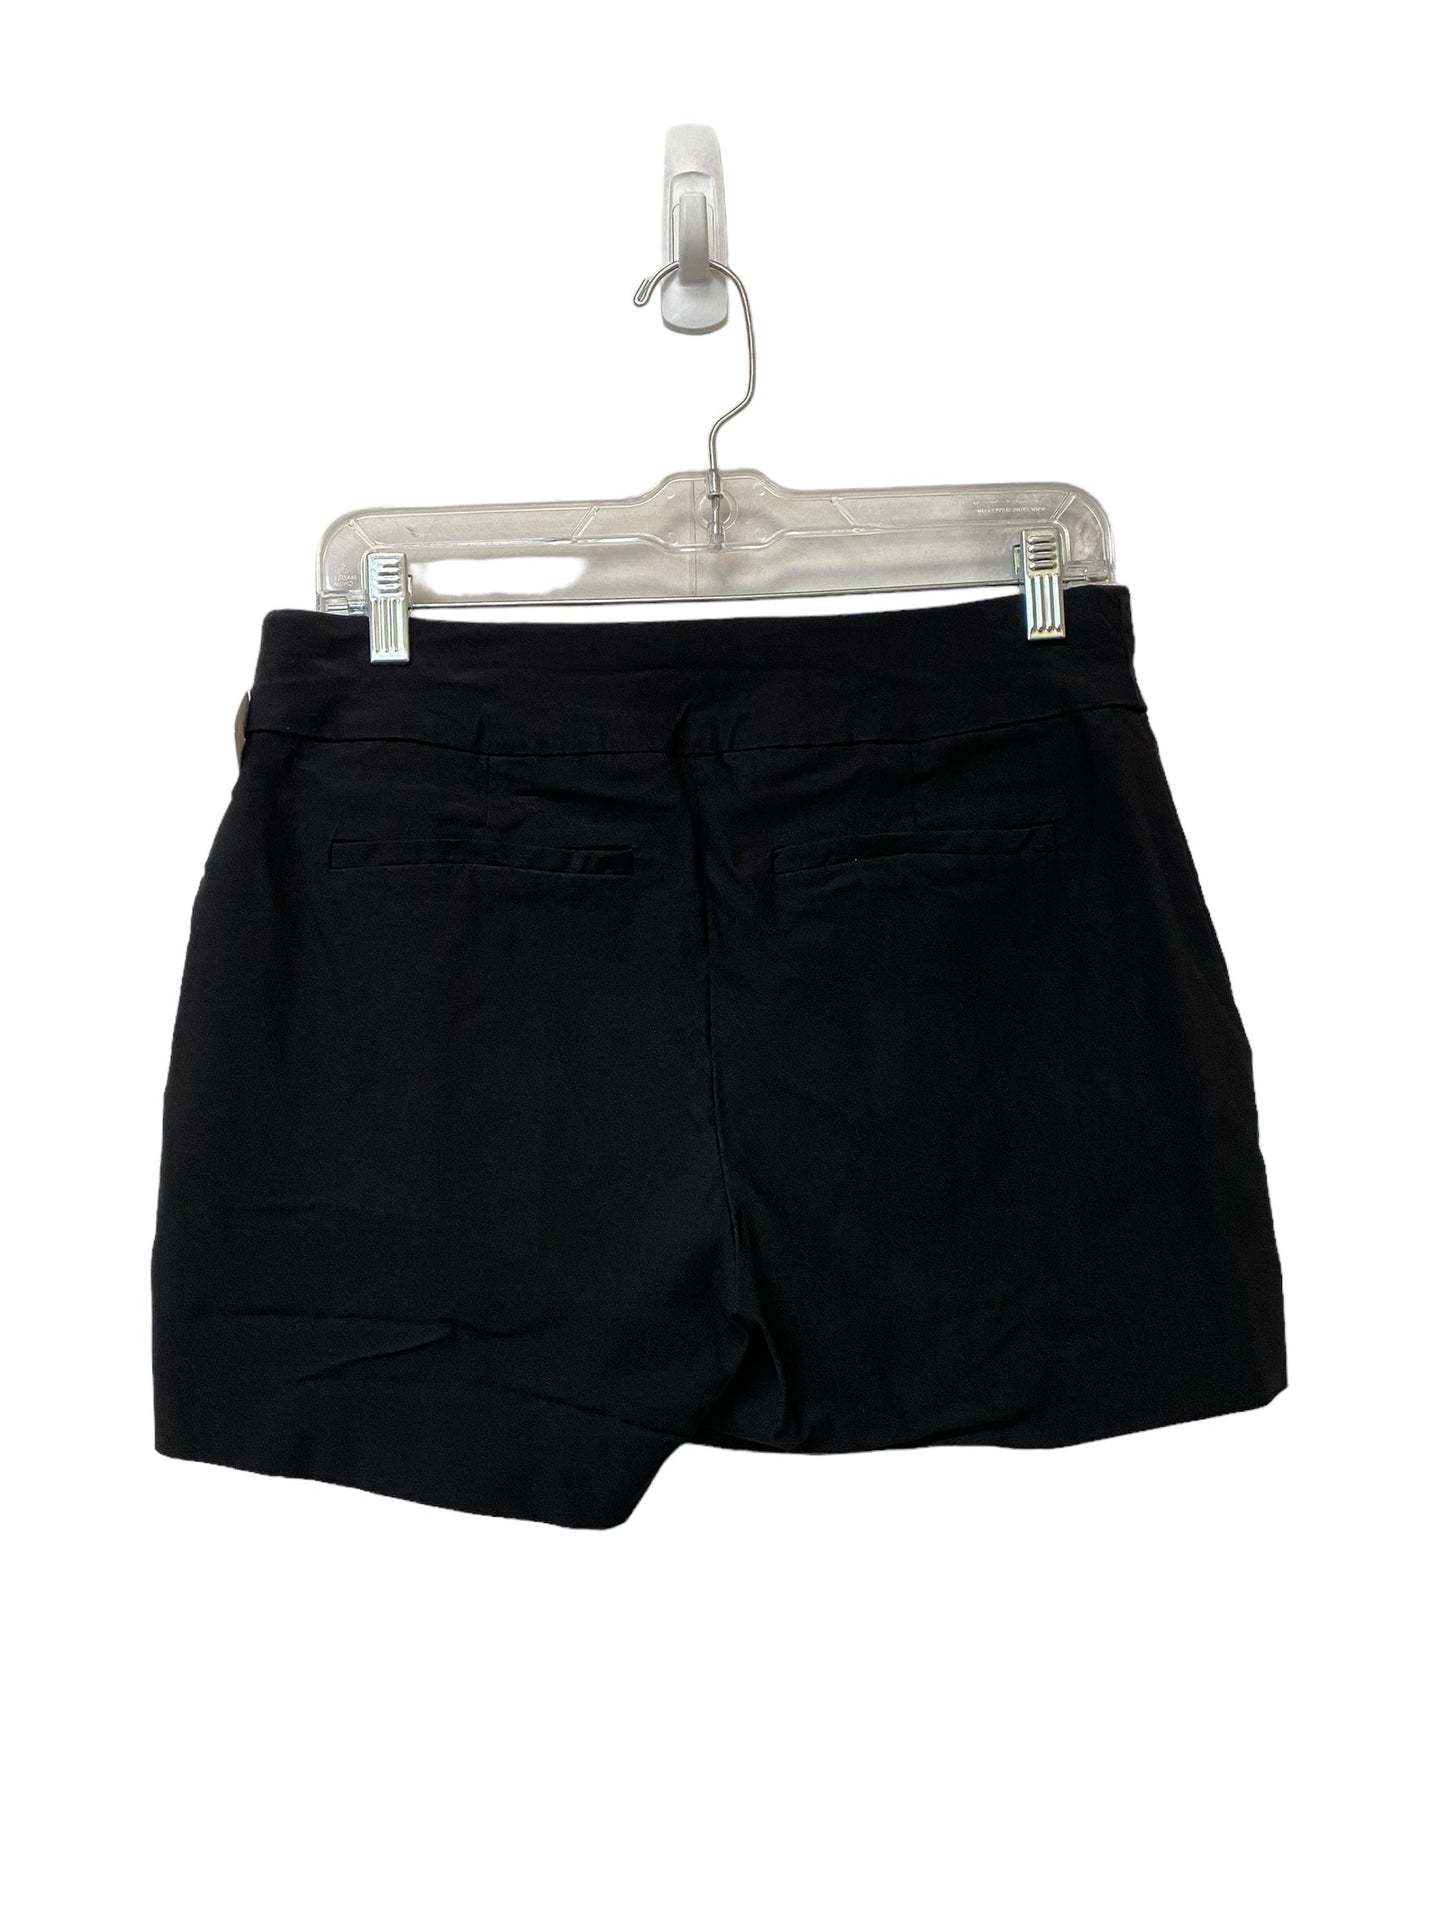 Black Shorts New York And Co, Size M